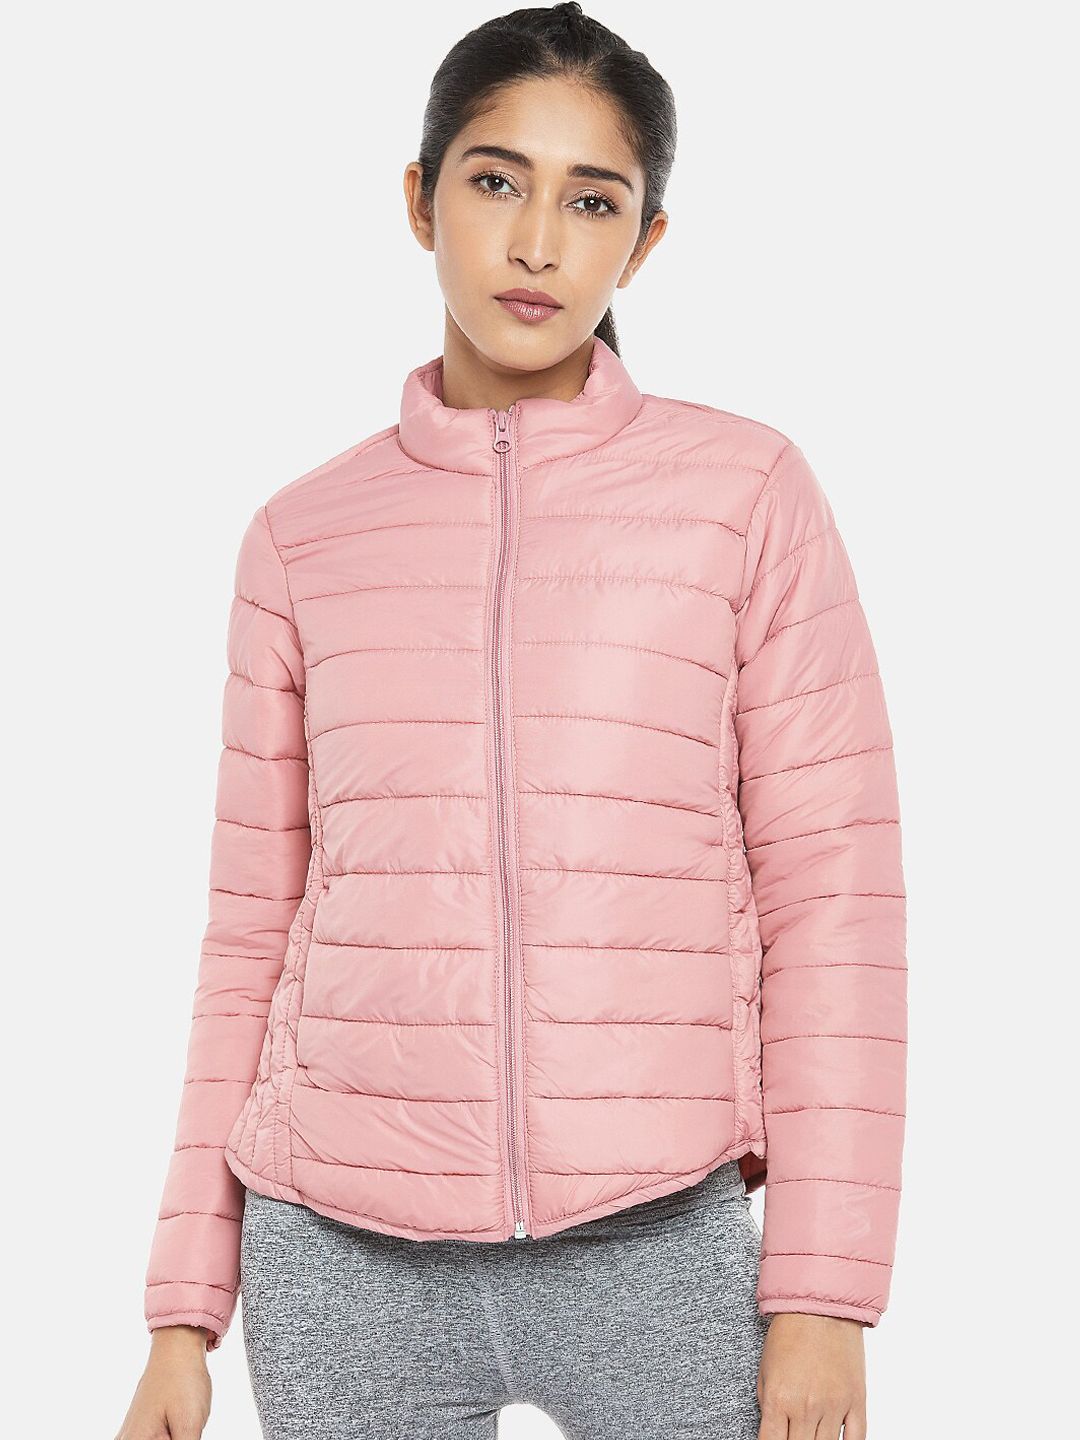 Ajile by Pantaloons Women Pink Solid Puffer Jacket Price in India